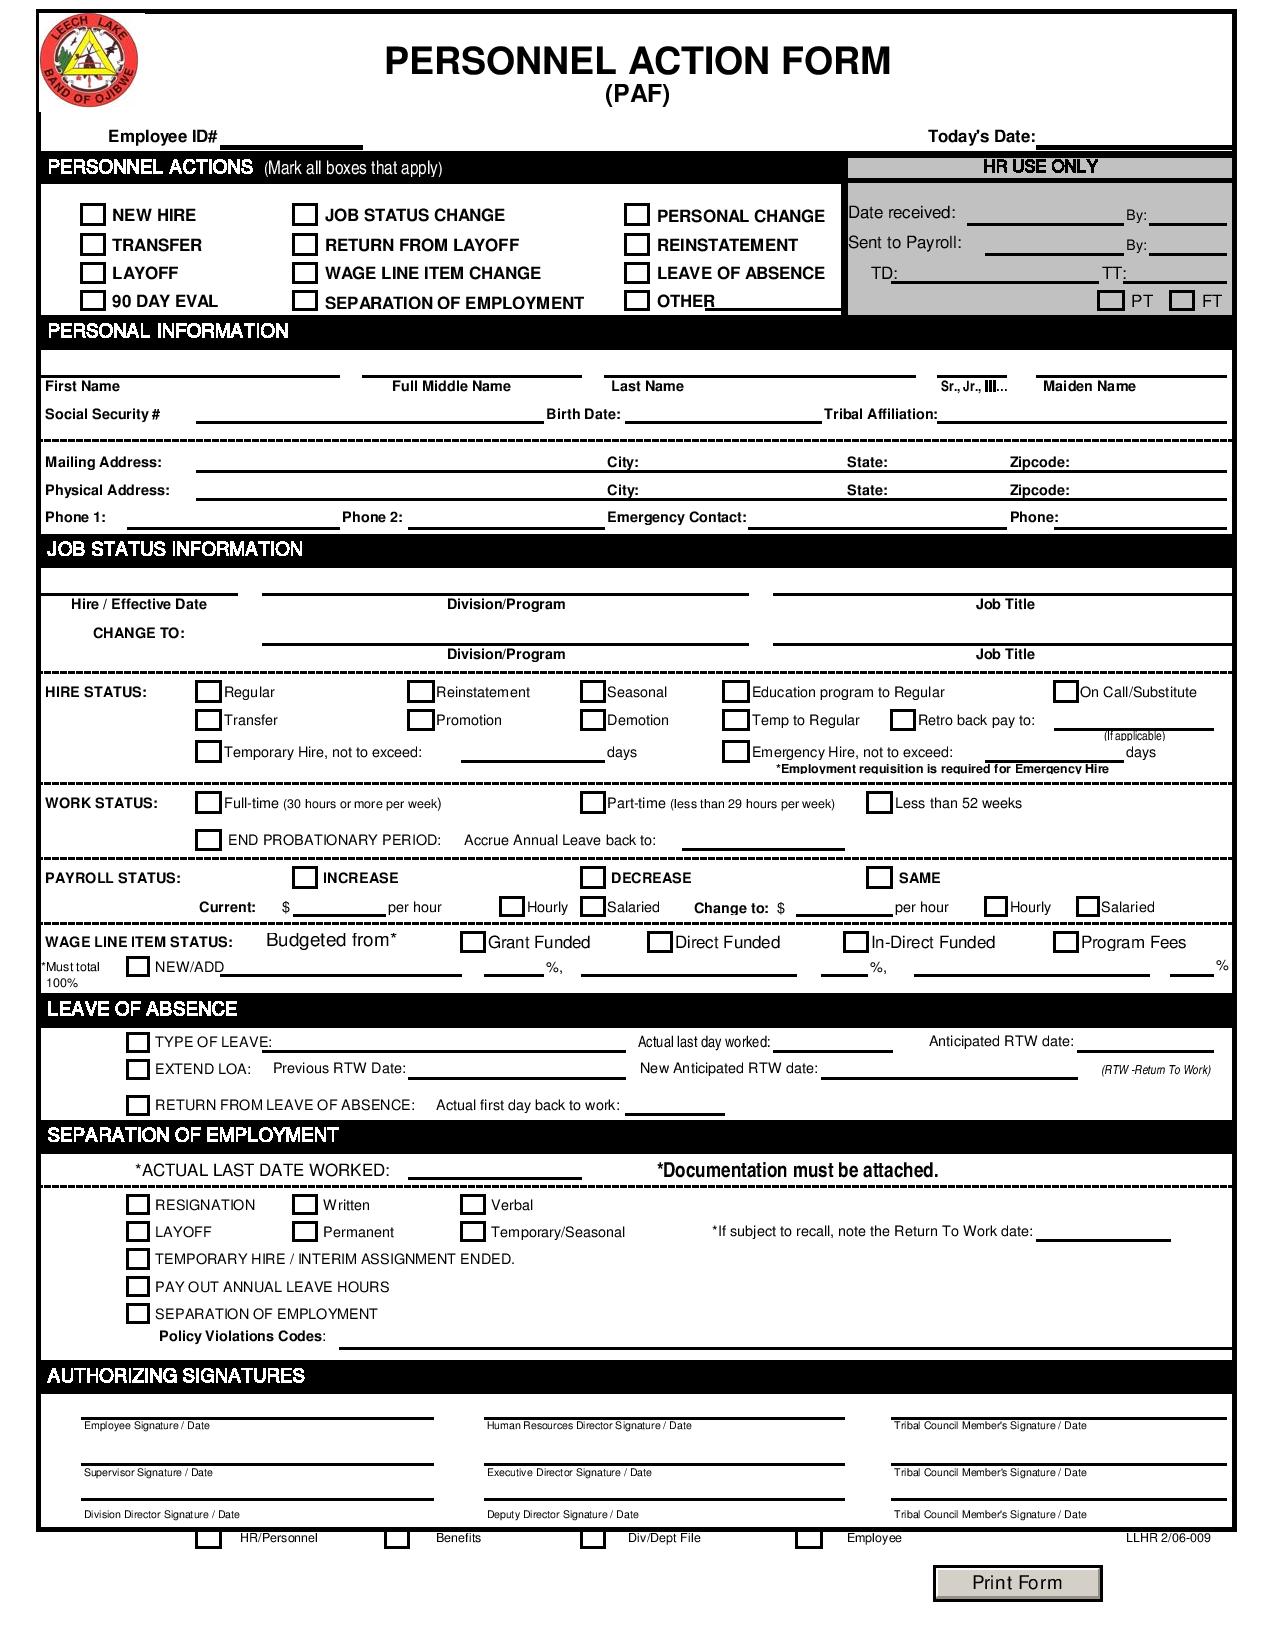 personnel action form paf page 001